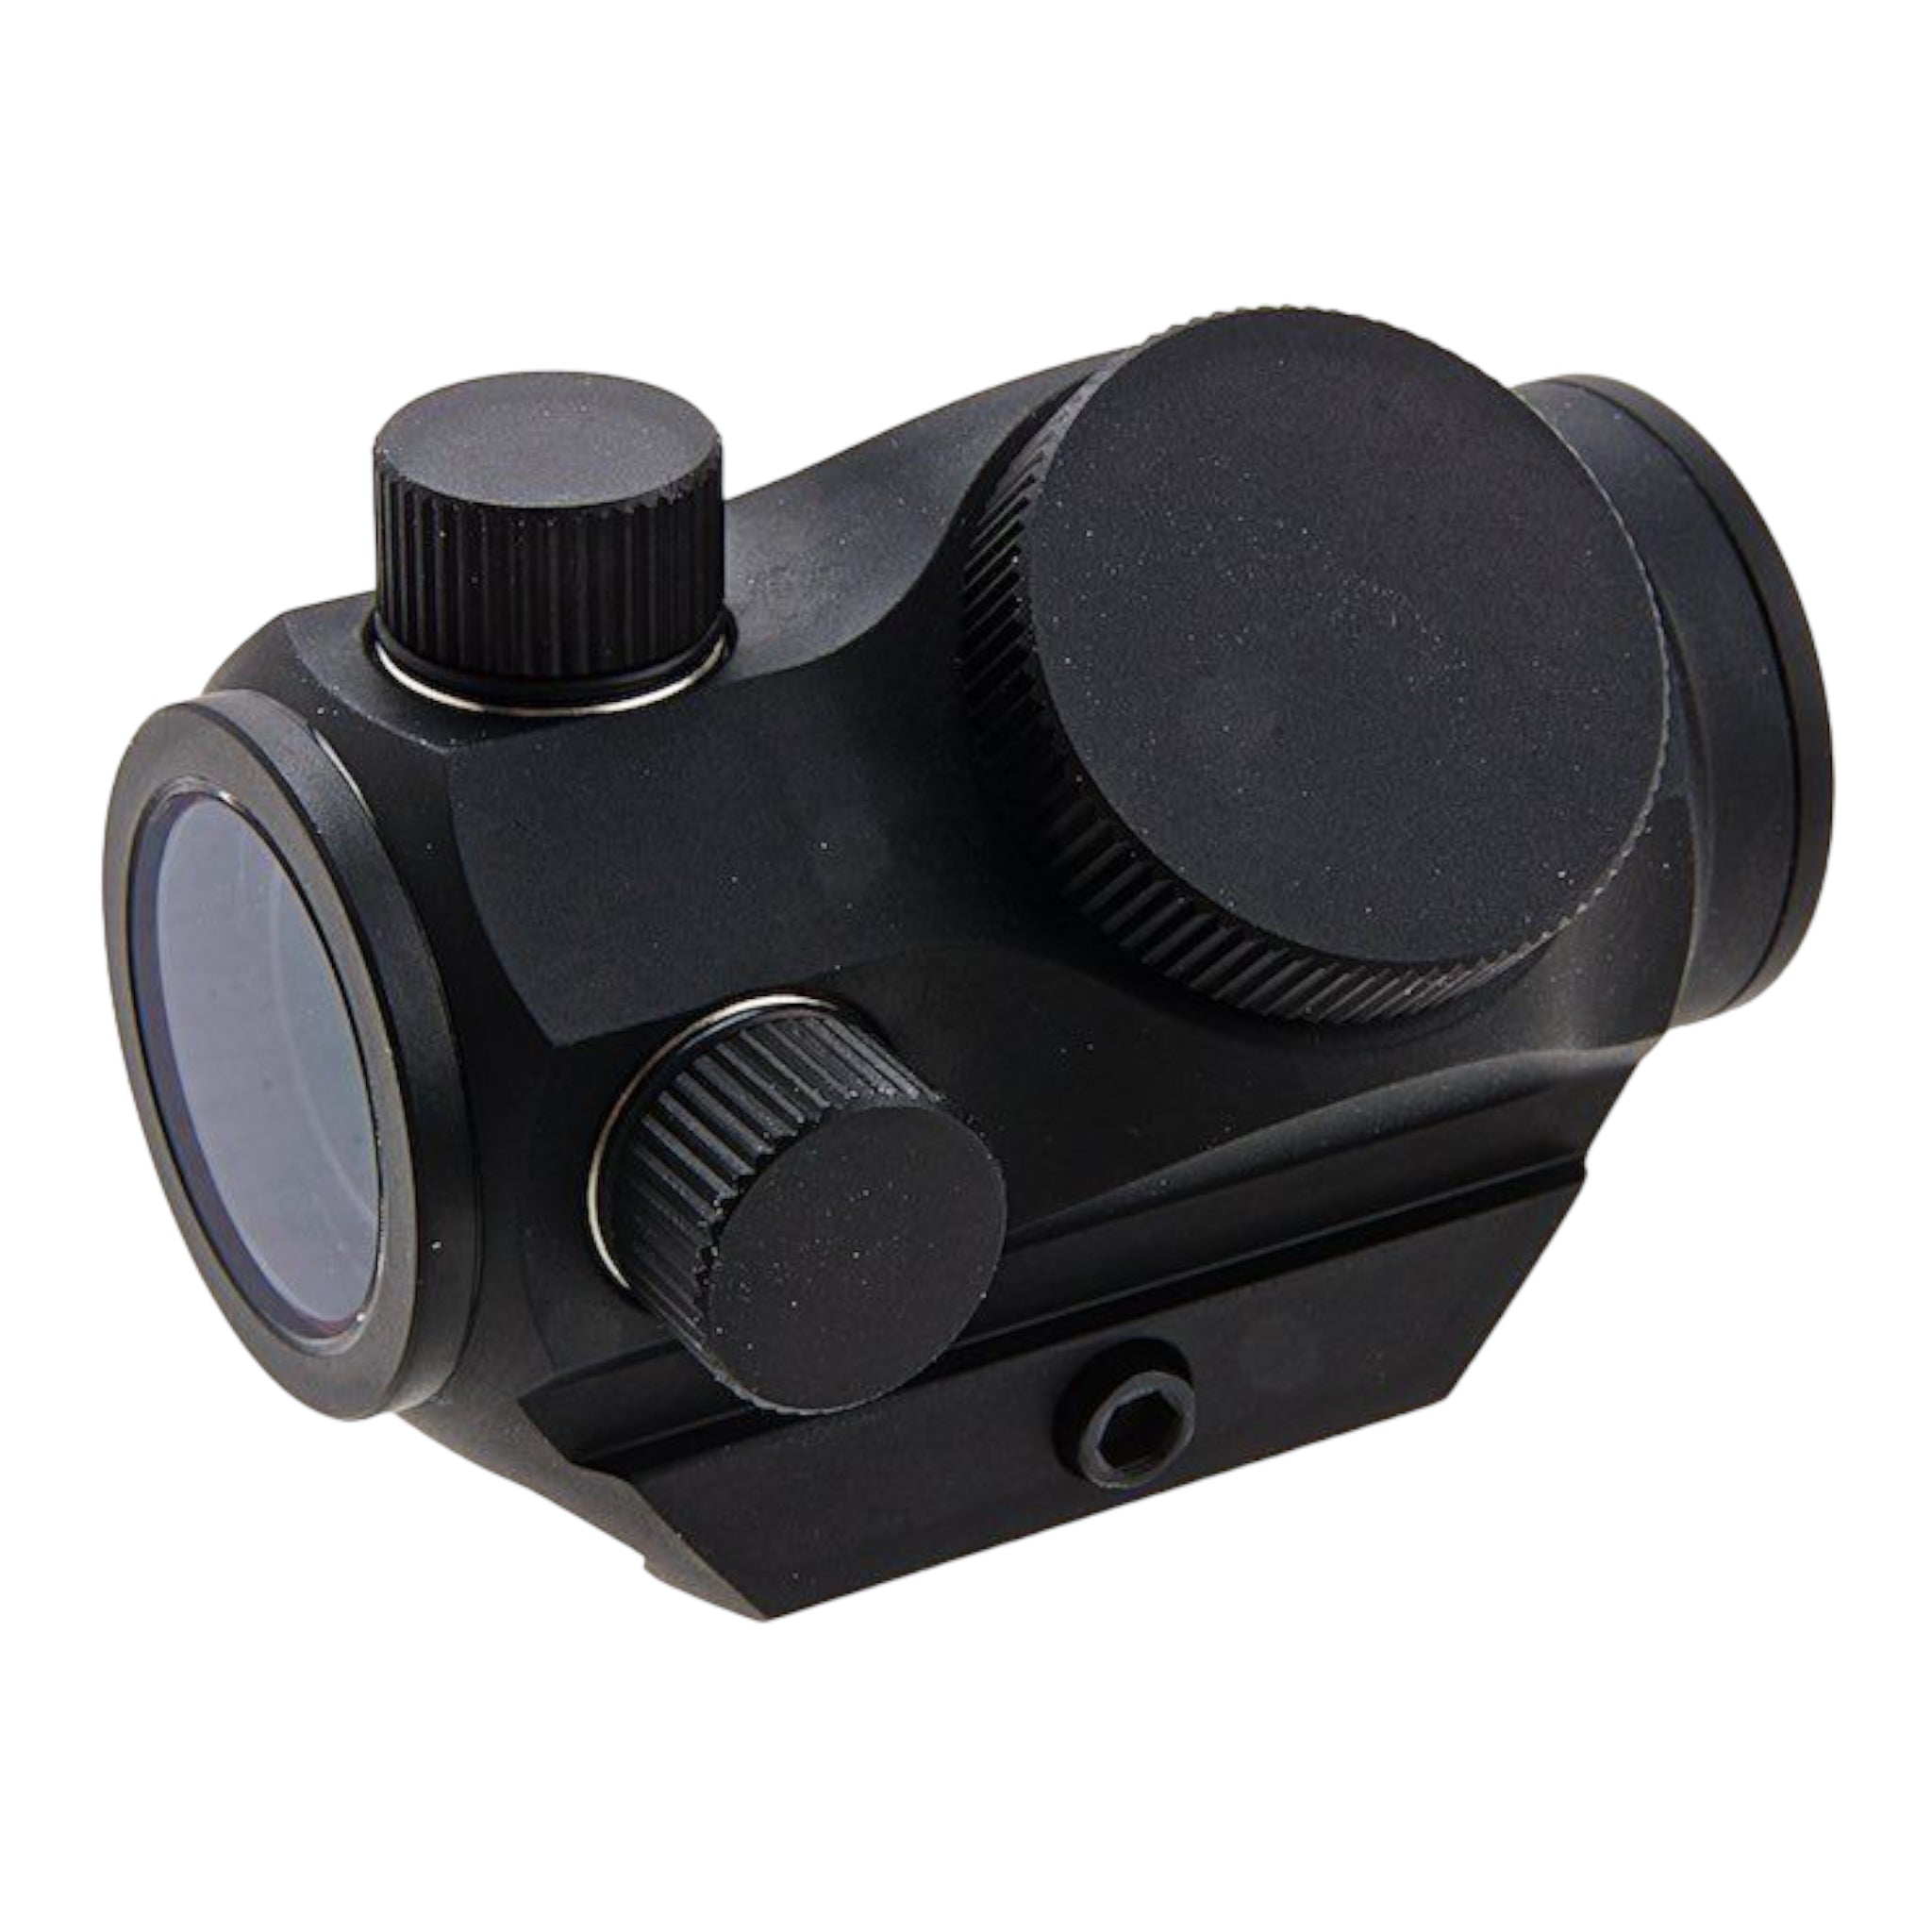 Novus Micro Red Dot Sight MDS-I - ssairsoft